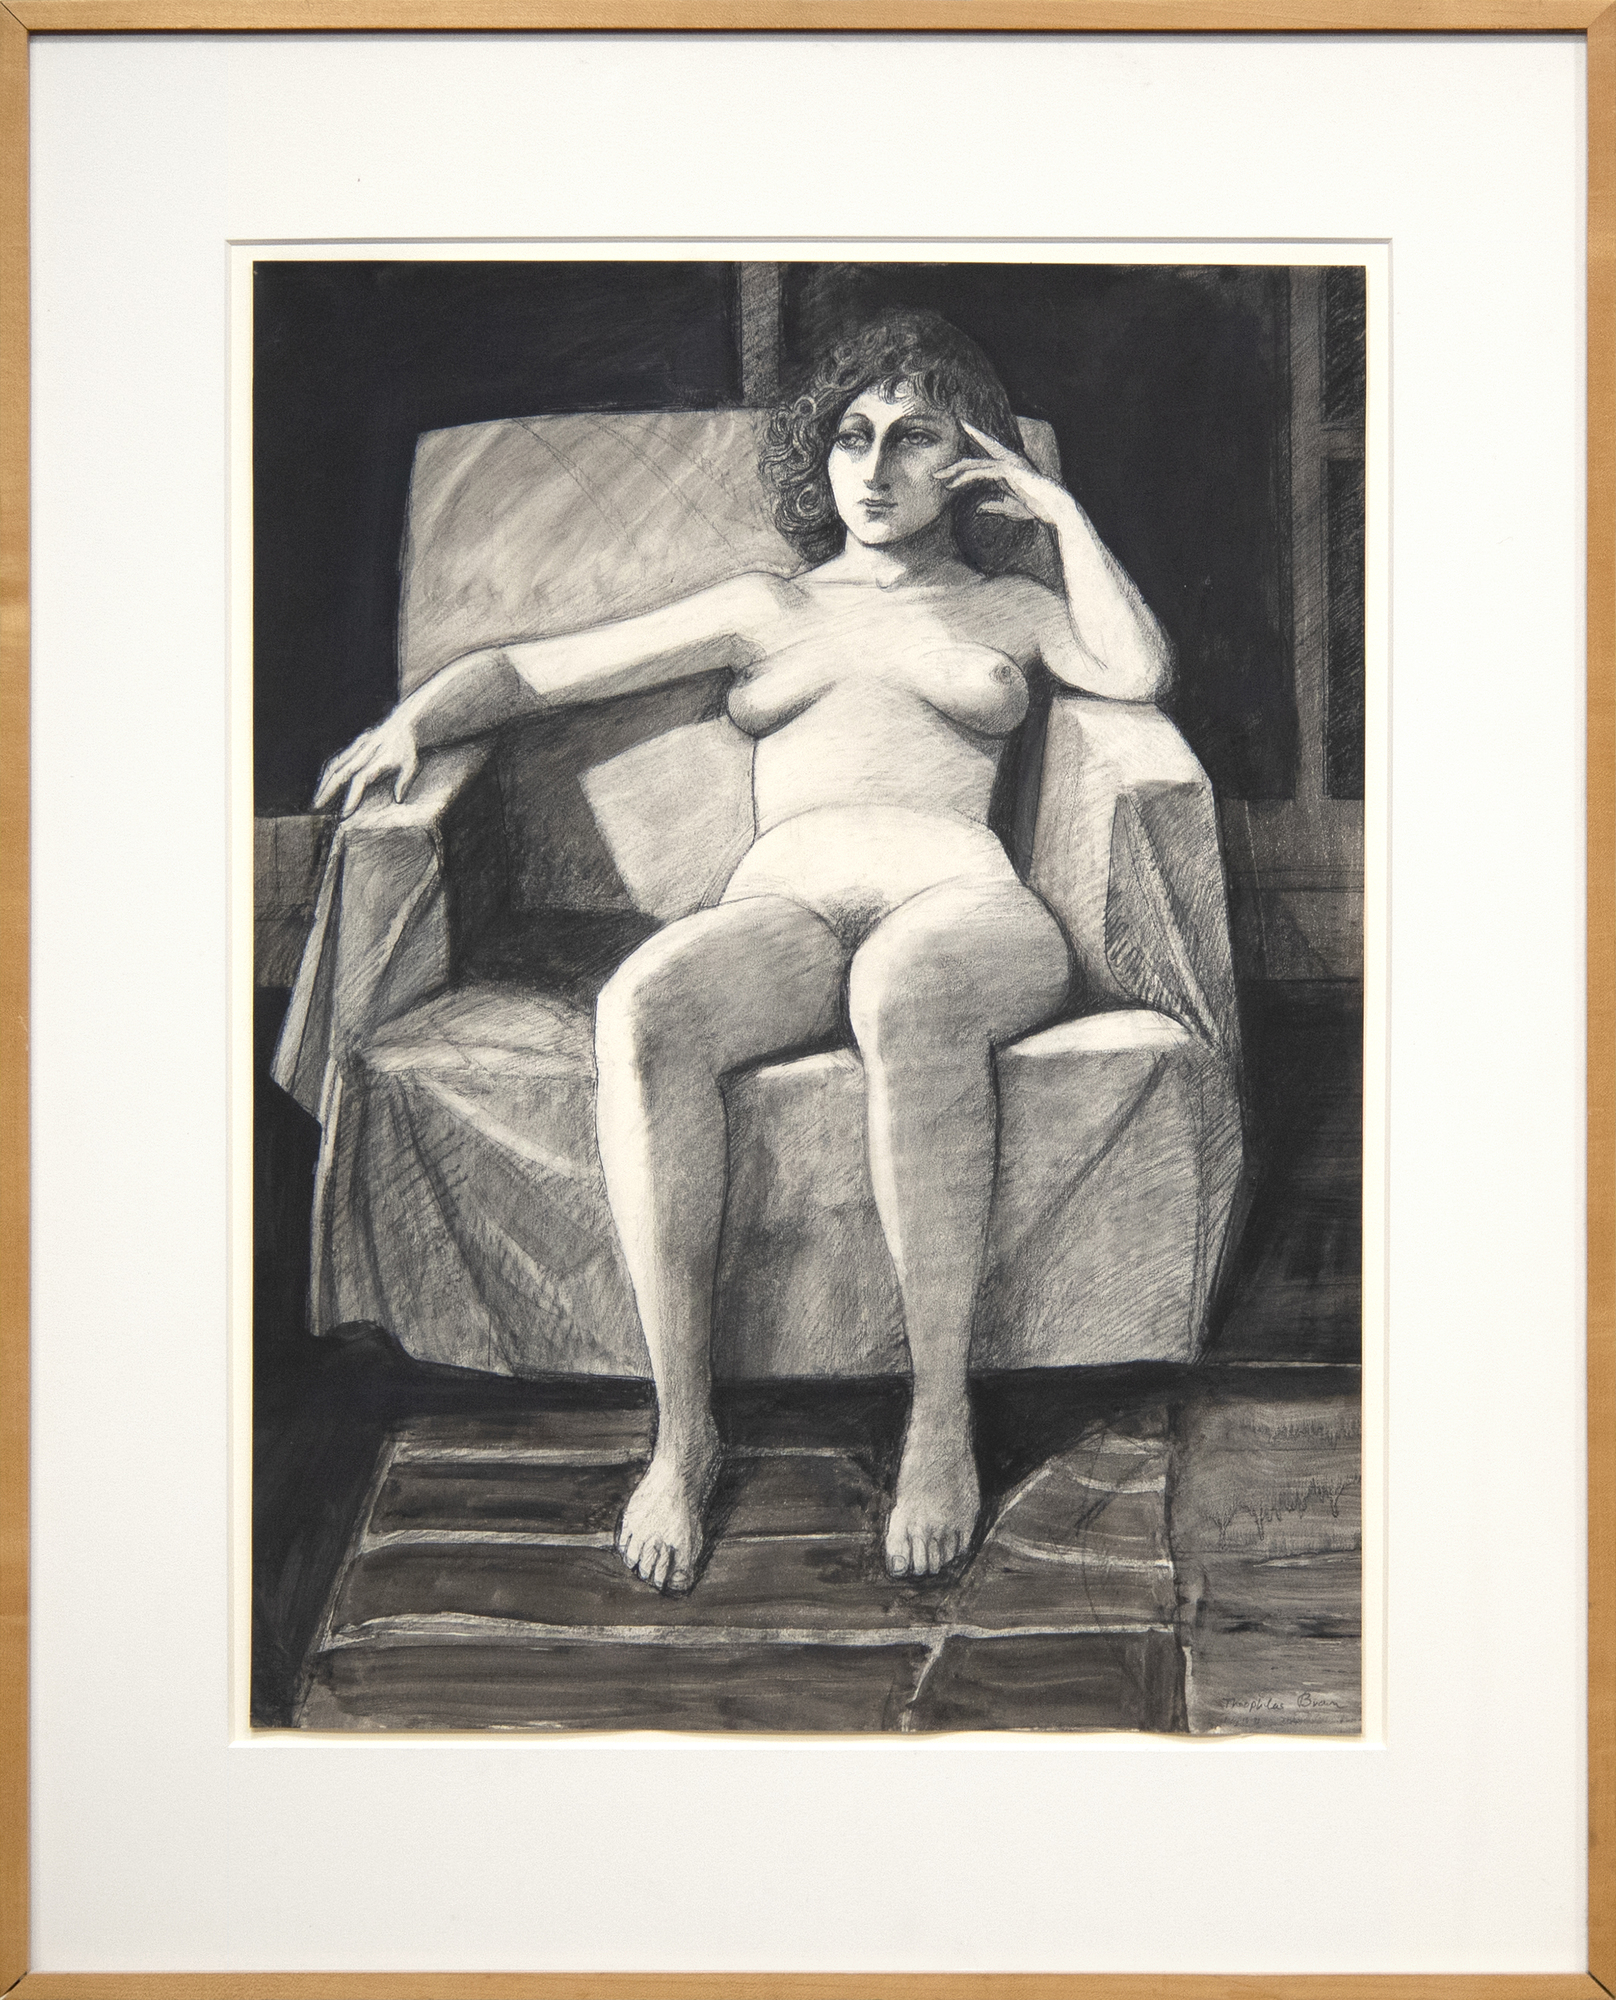 WILLIAM THEOPHILUS BROWN - Untitled (Seated Female Nude) - charcoal, pencil and wash on paper - 25 1/2 x 19 1/2 in.